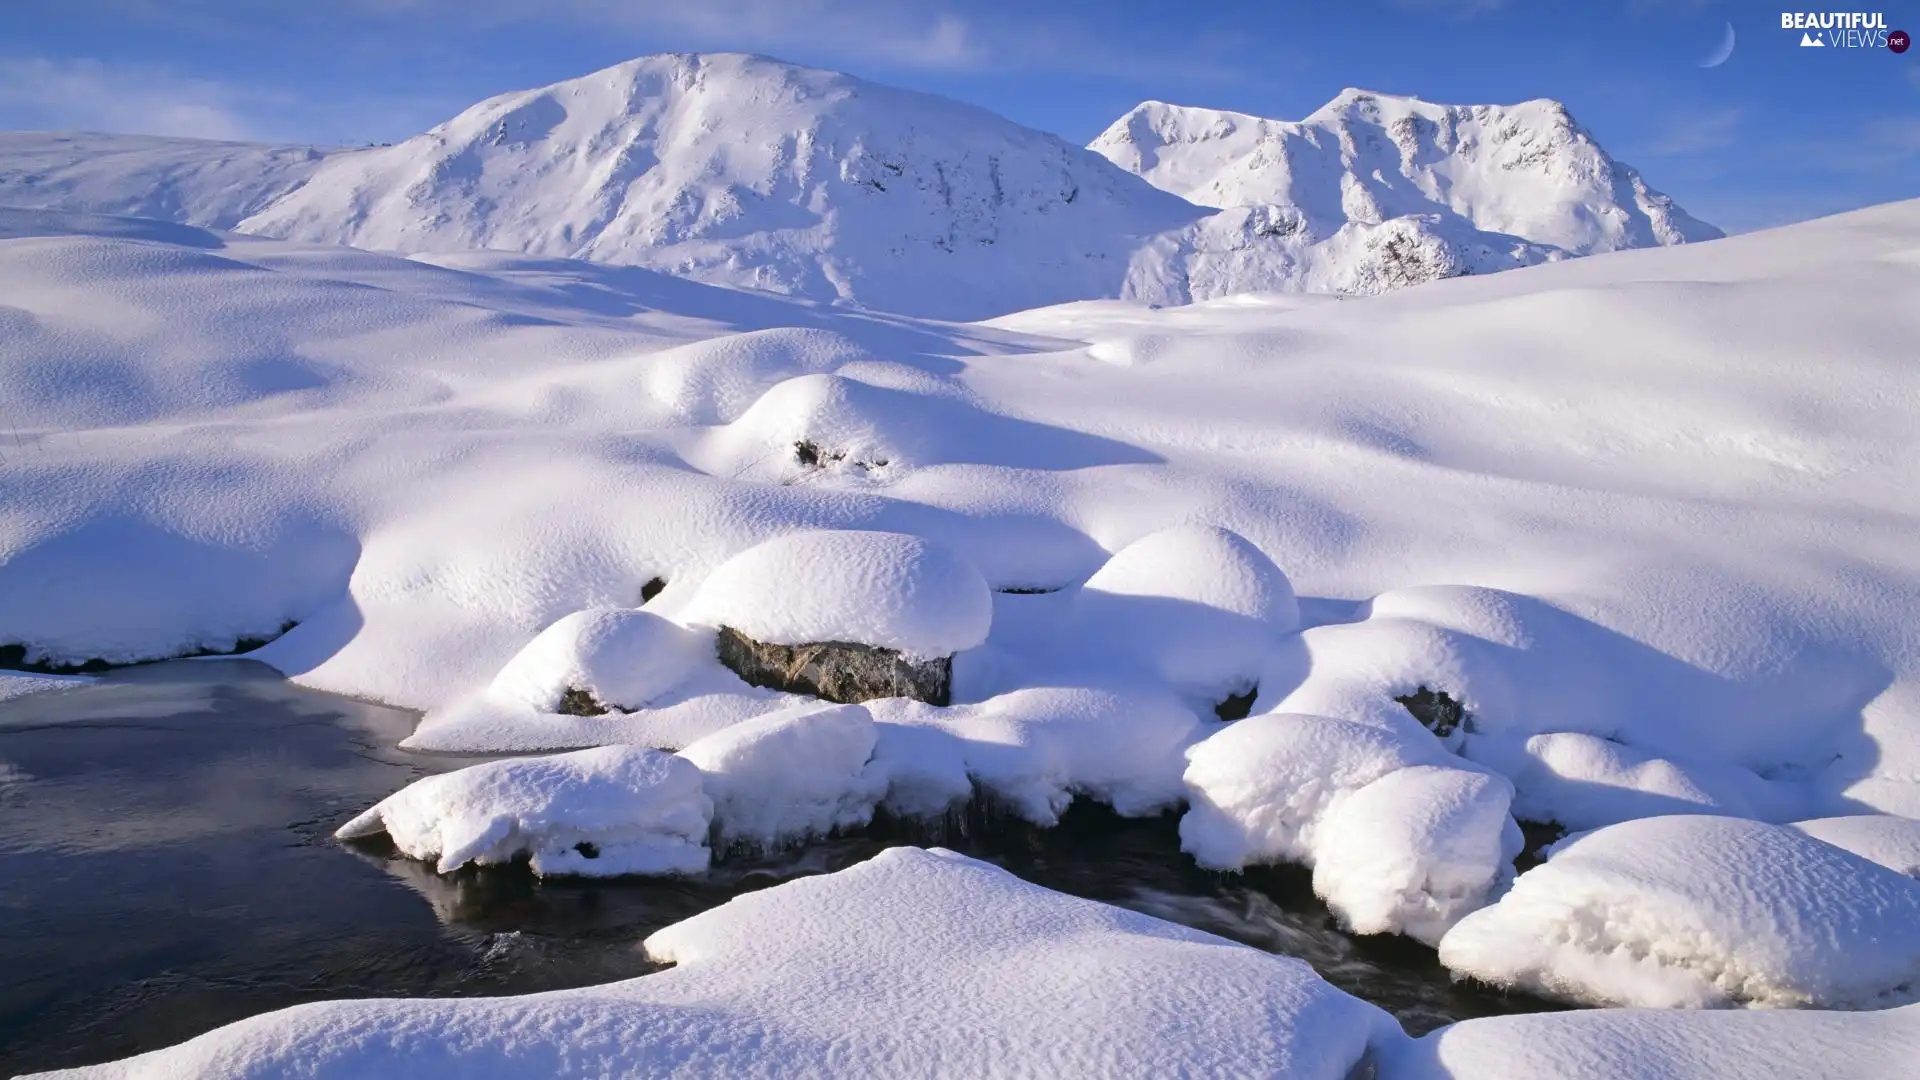 Mountains, drifts, water, snow